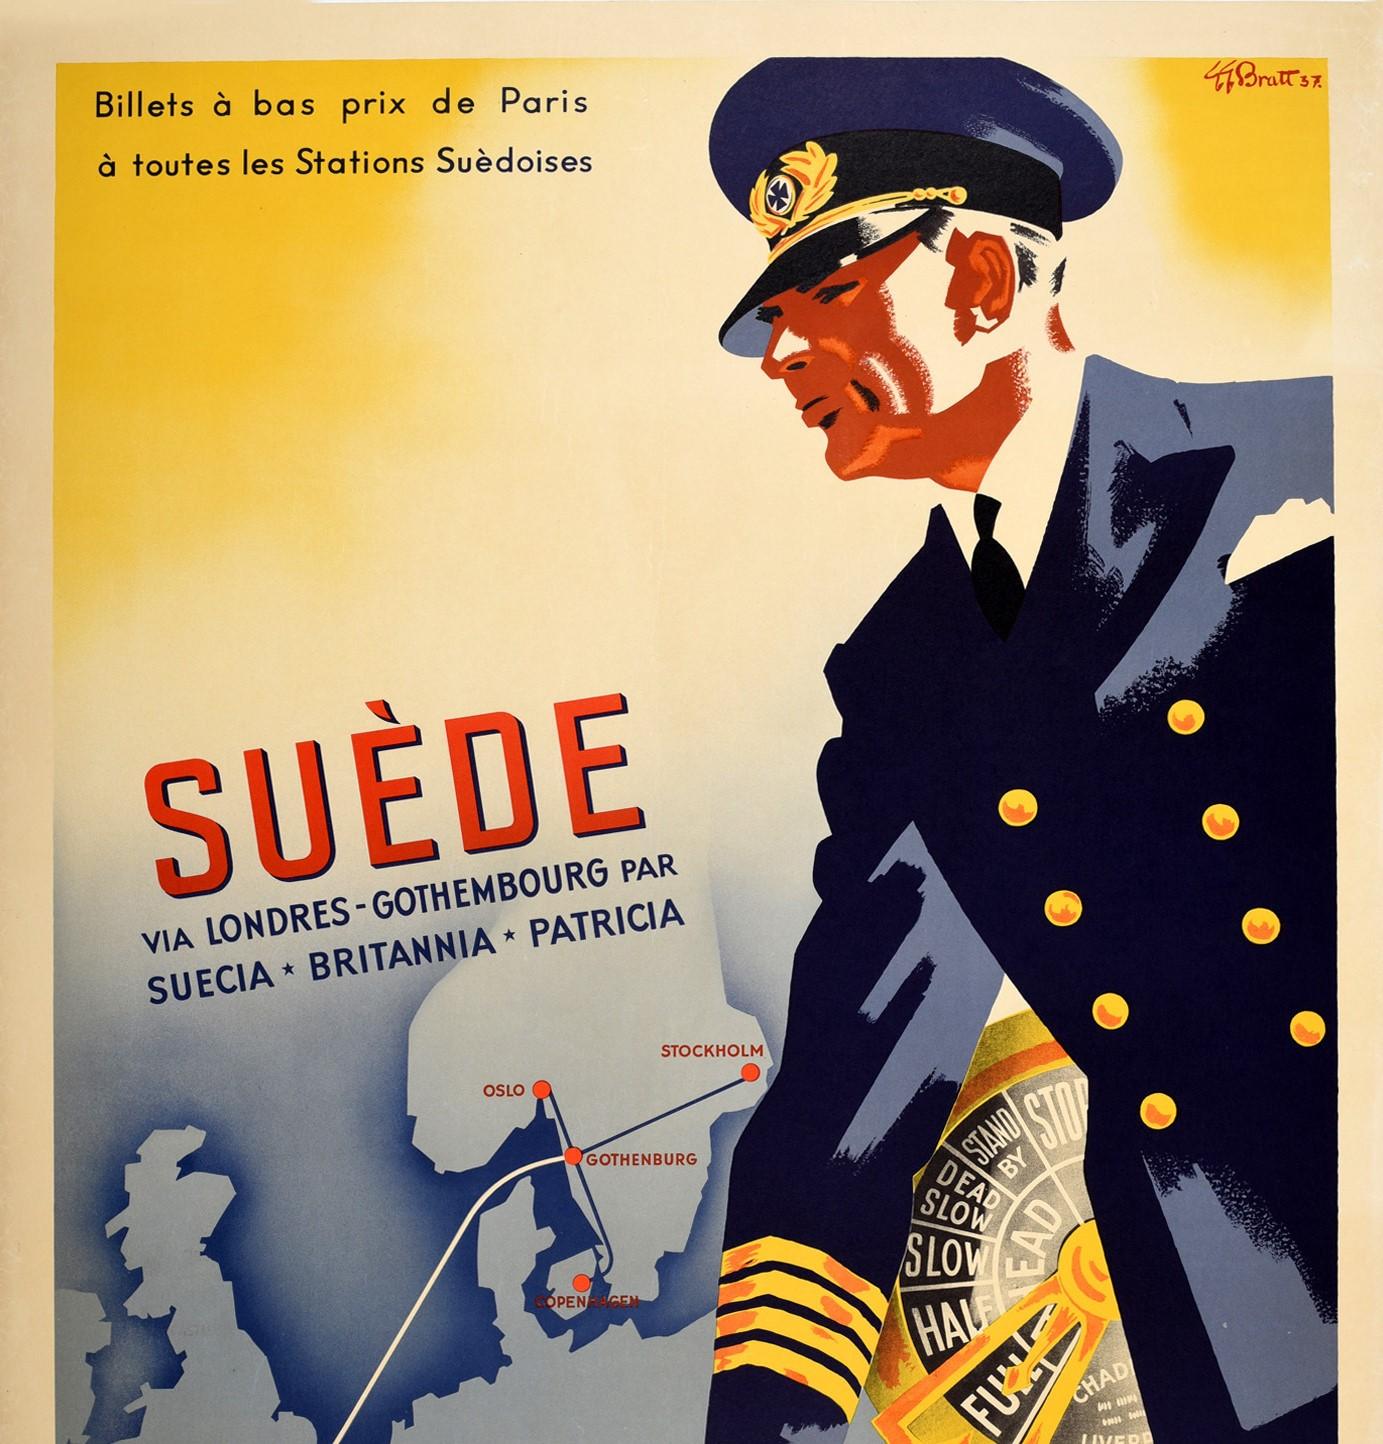 Original vintage cruise travel poster advertising Swedish Lloyd / Svenska Lloyd featuring great artwork of a captain in a smart blue uniform and hat with his hand on the engine order telegraph turned to full steam ahead powering the ship to the